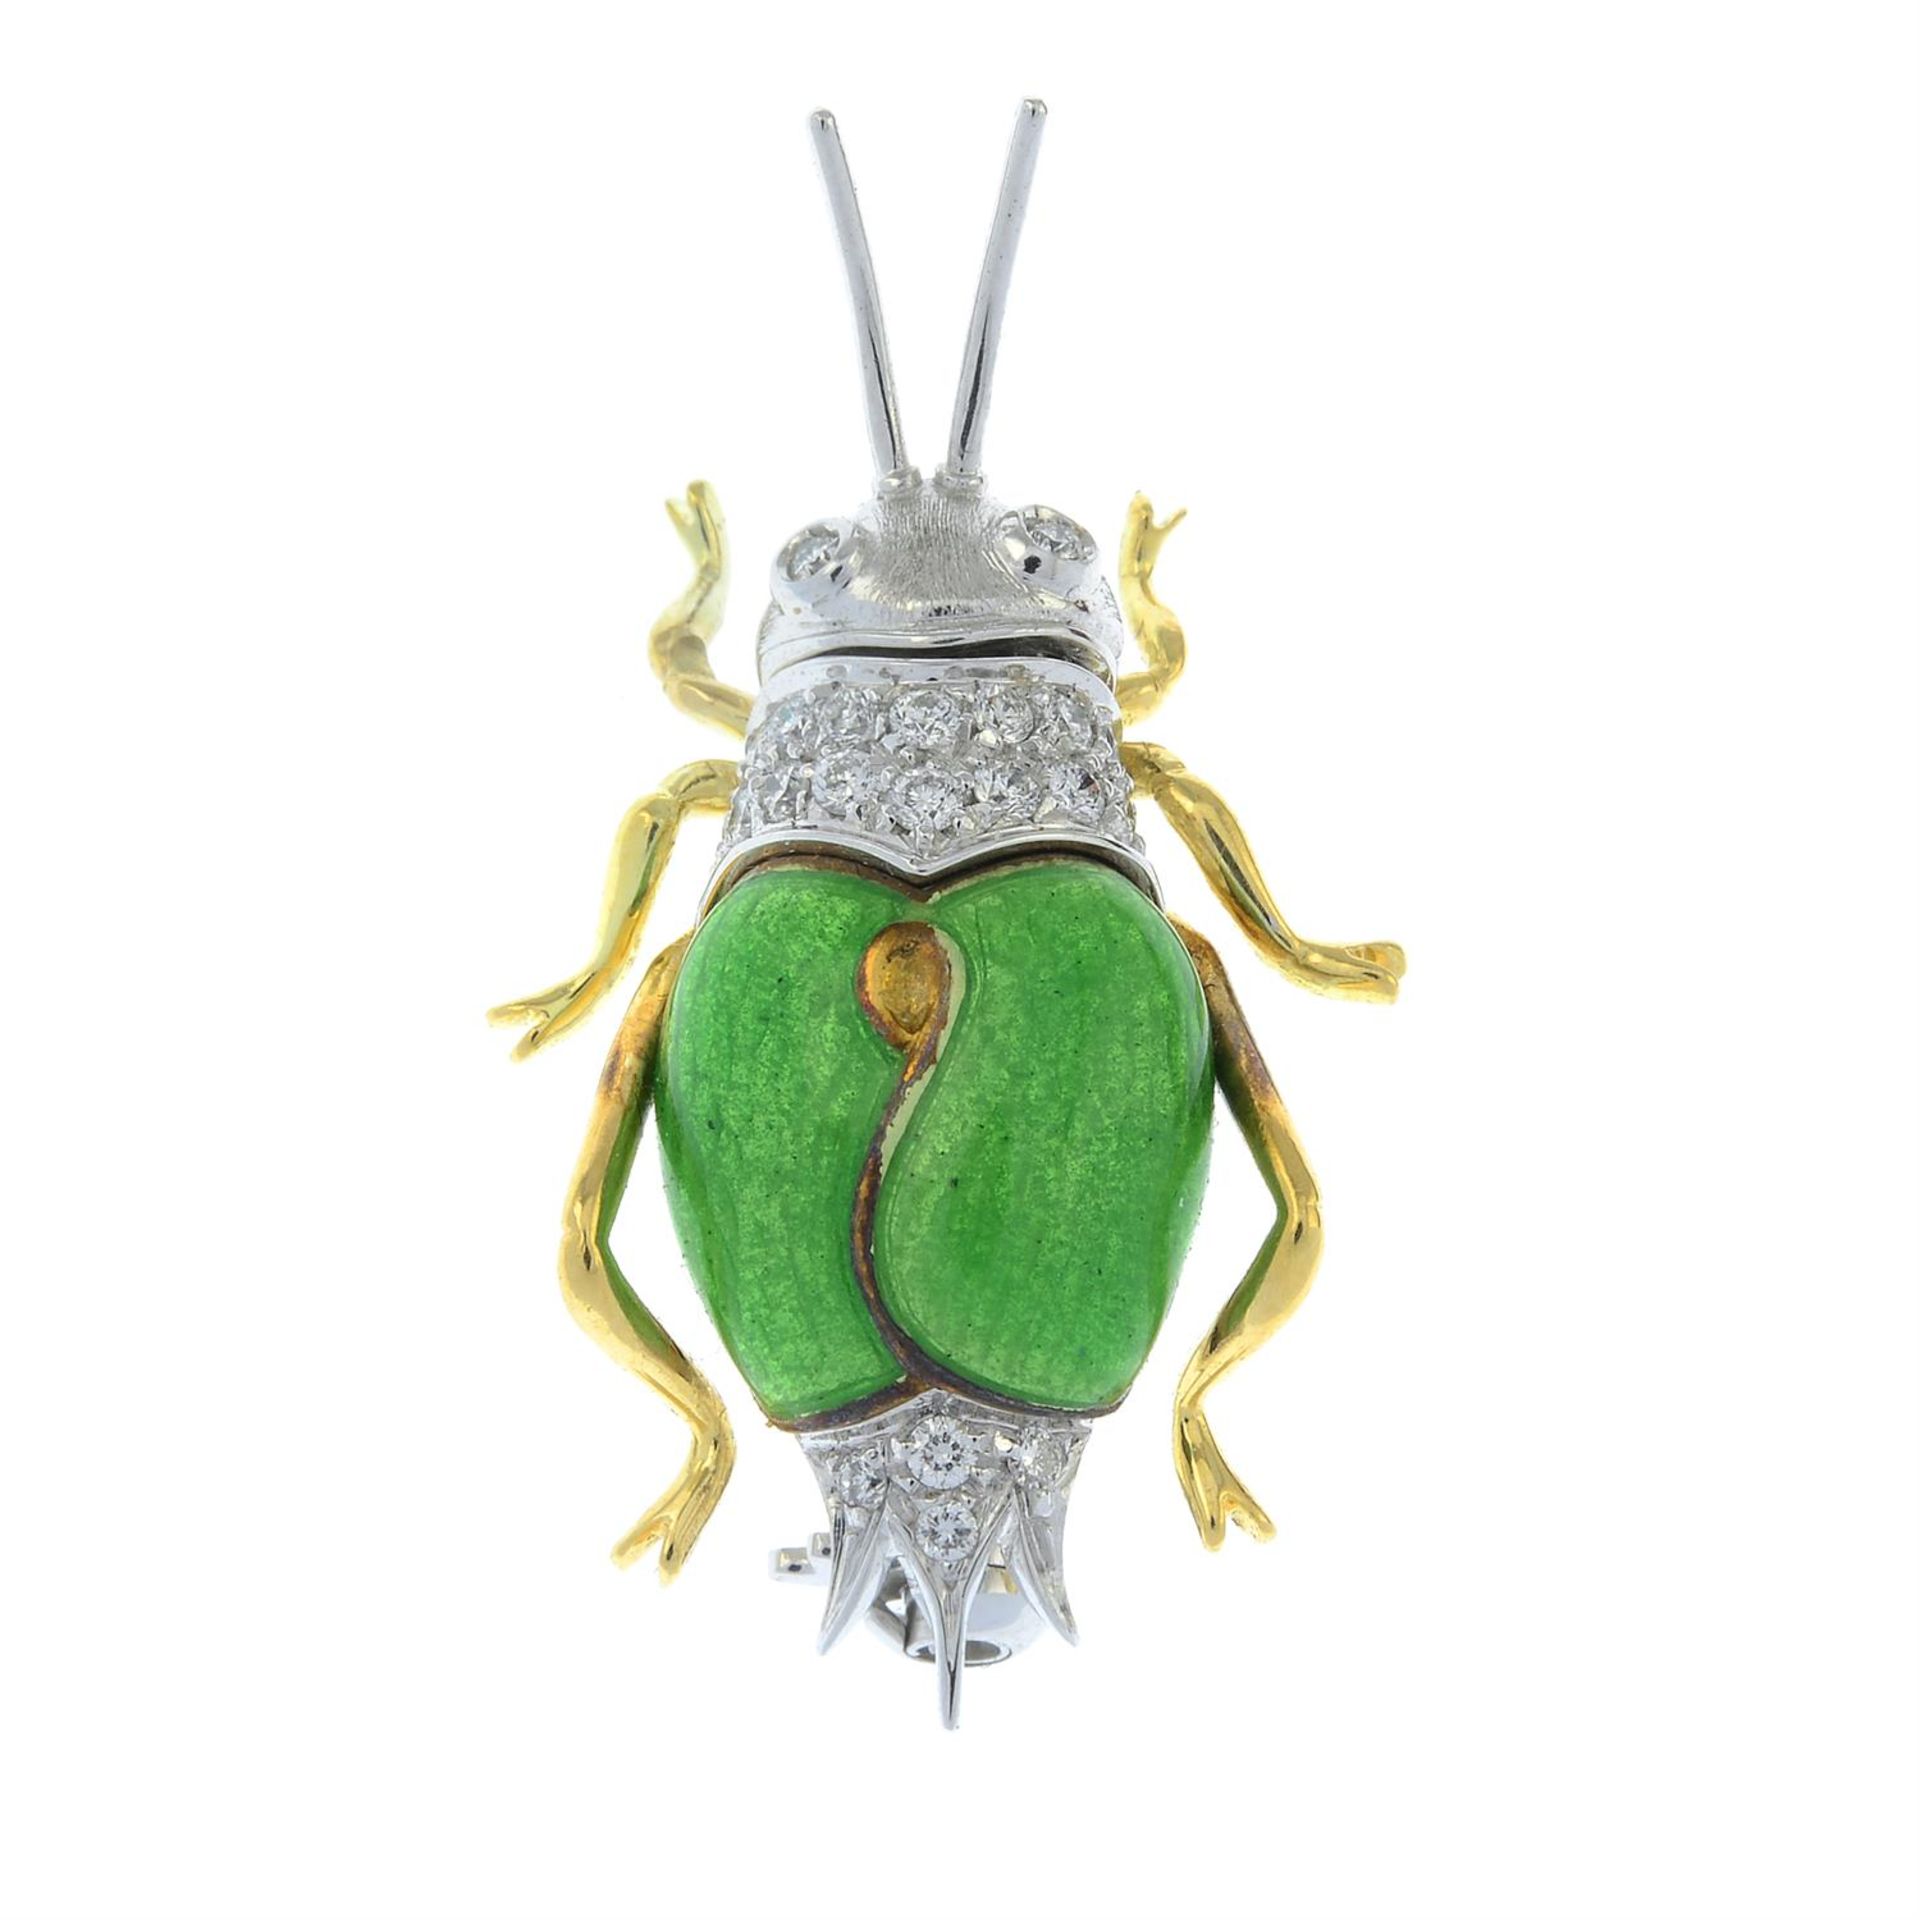 A diamond and green enamel grasshopper brooch, by Gioielli. - Image 2 of 4